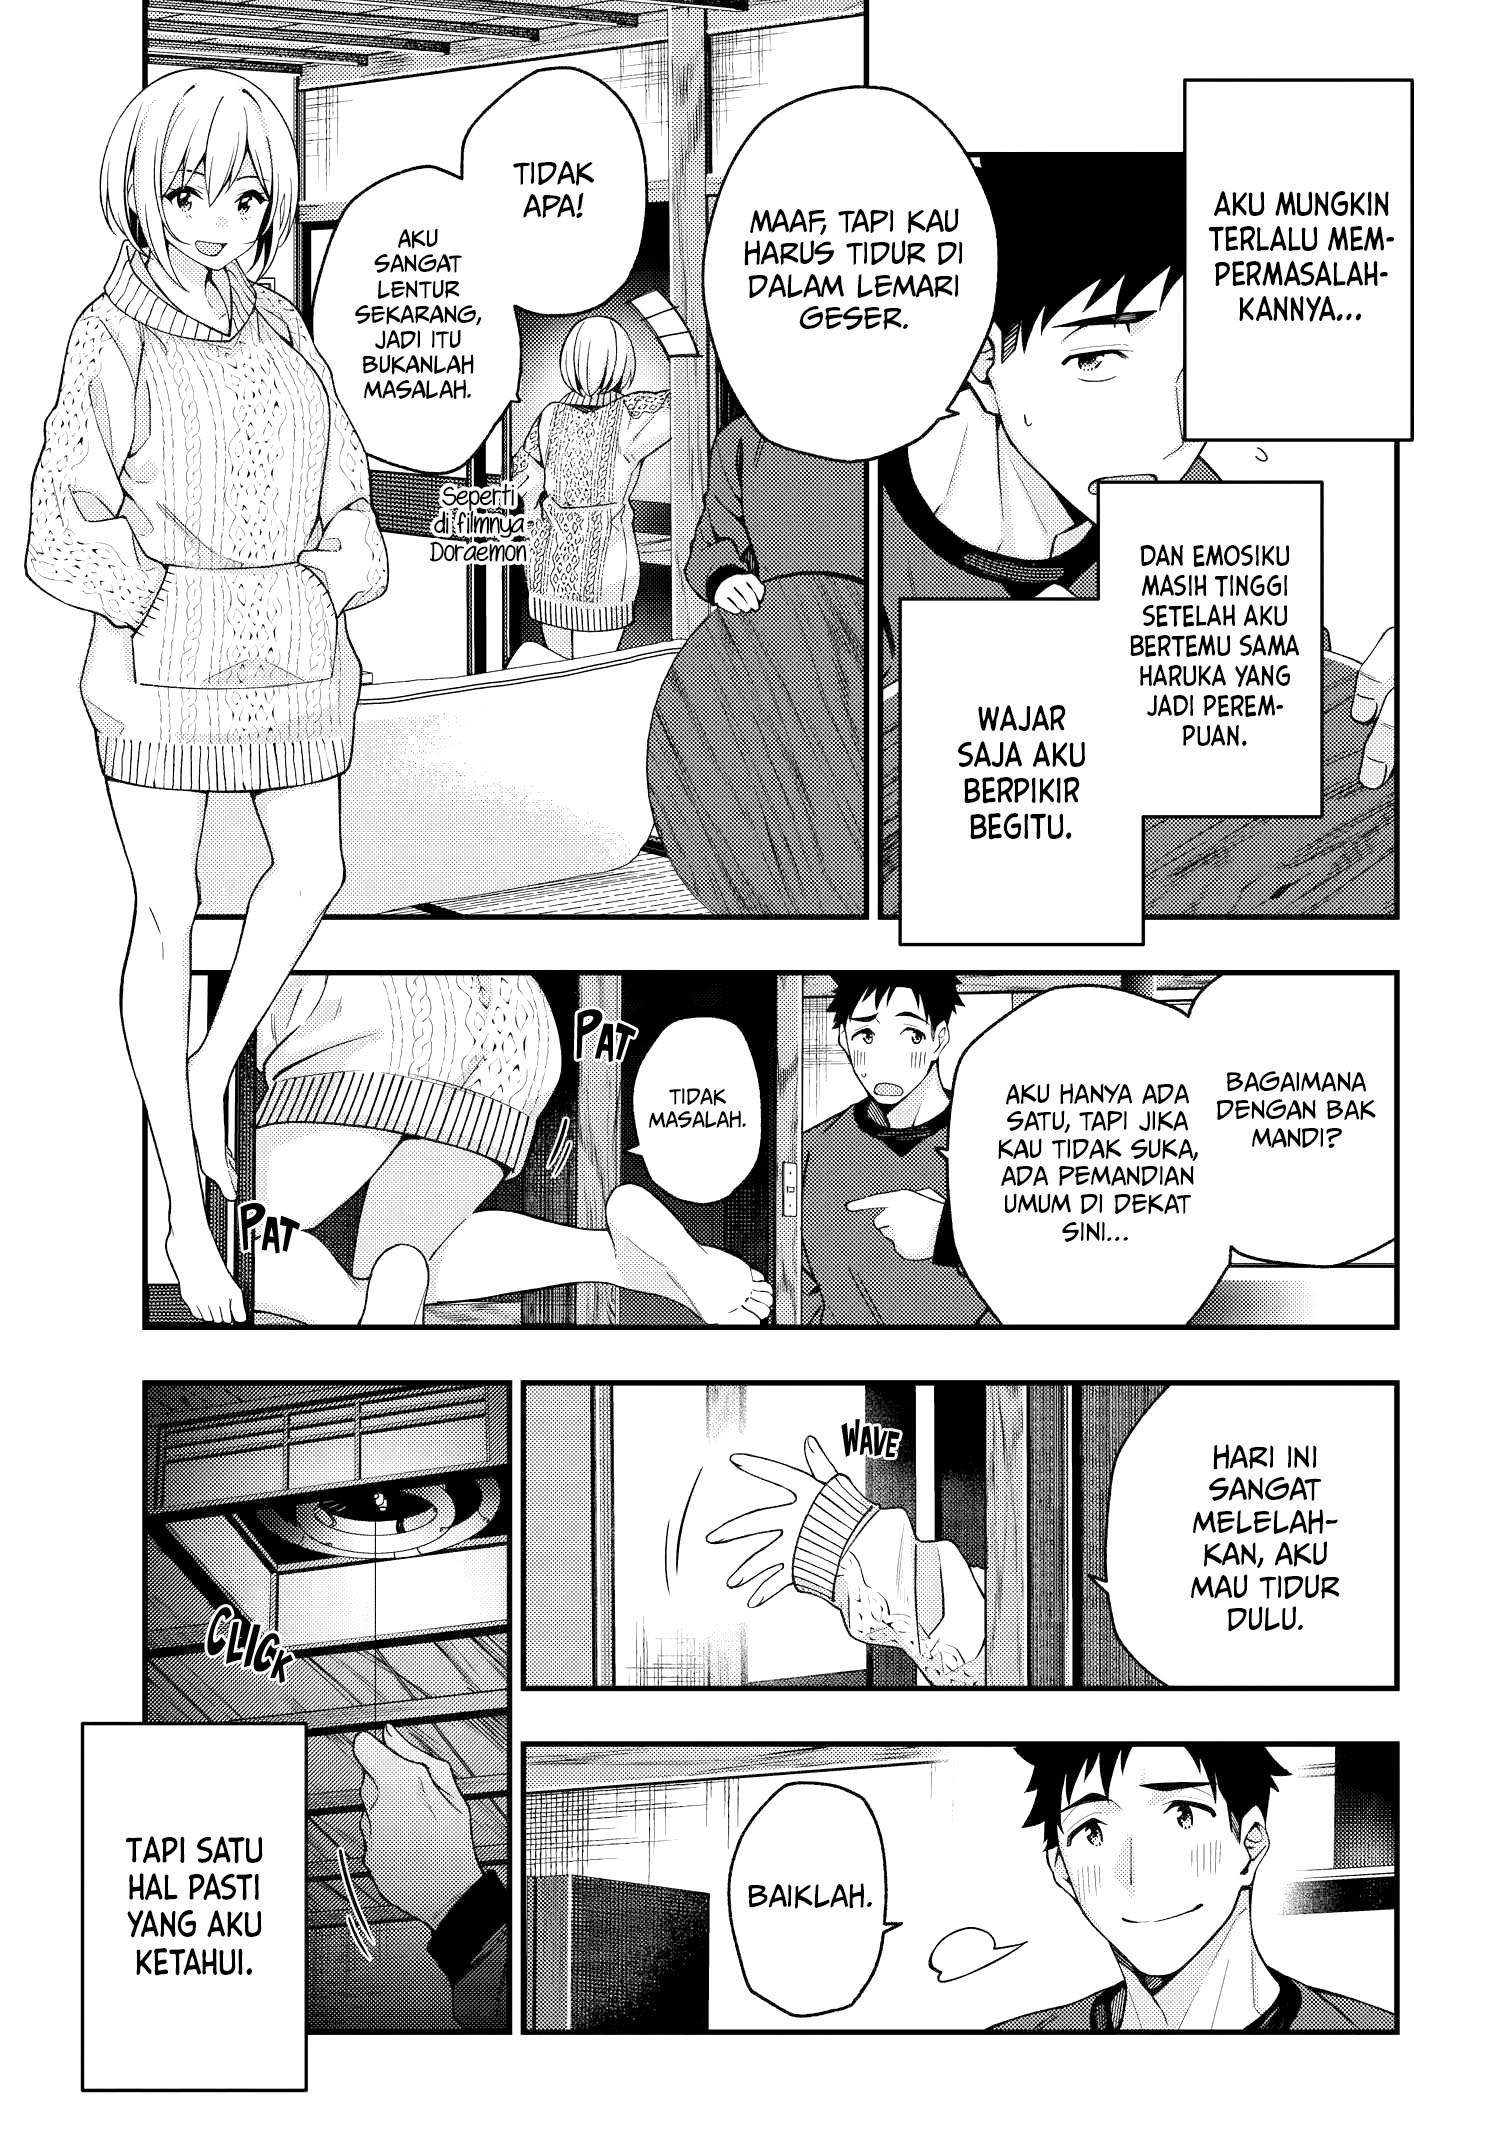 A Choice of Boyfriend and Girlfriend Chapter 02 34